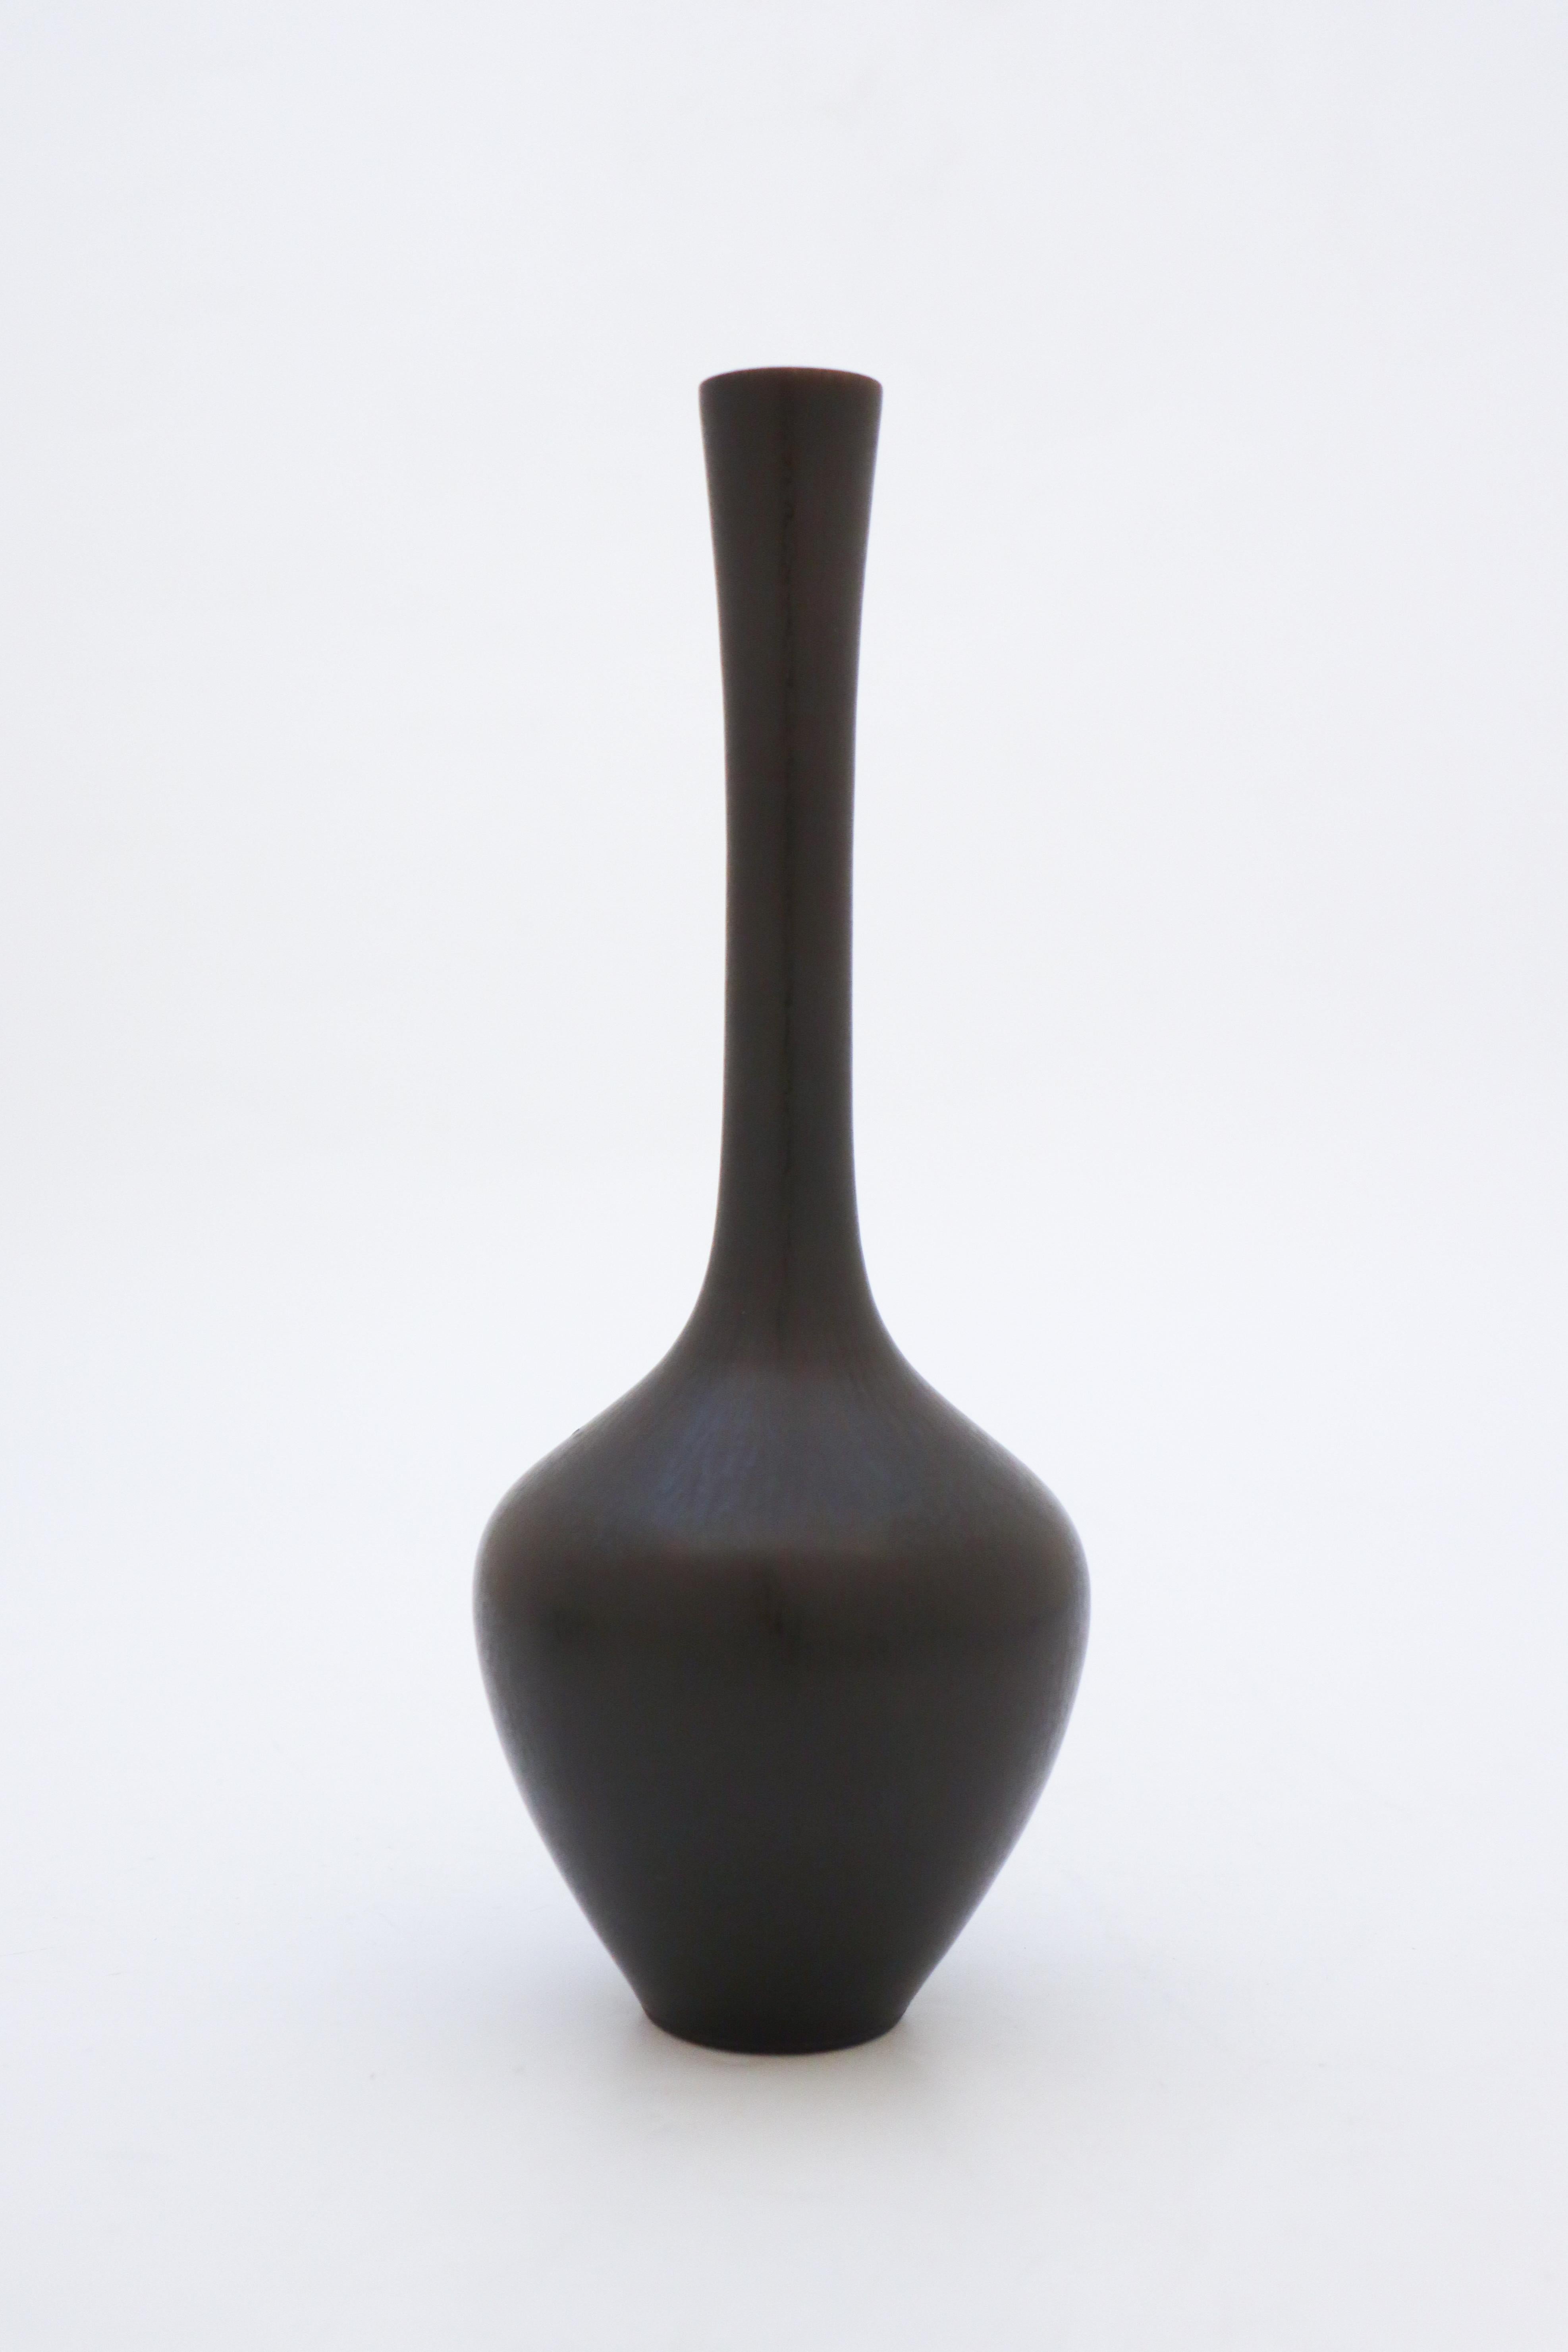 A lovely black vase designed by Berndt Friberg at Gustavsberg in Stockholm, the vase is 23.5 cm high with a lovely harfur glaze. It's marked as on picture and was made in 1953. It is in excellent condition.